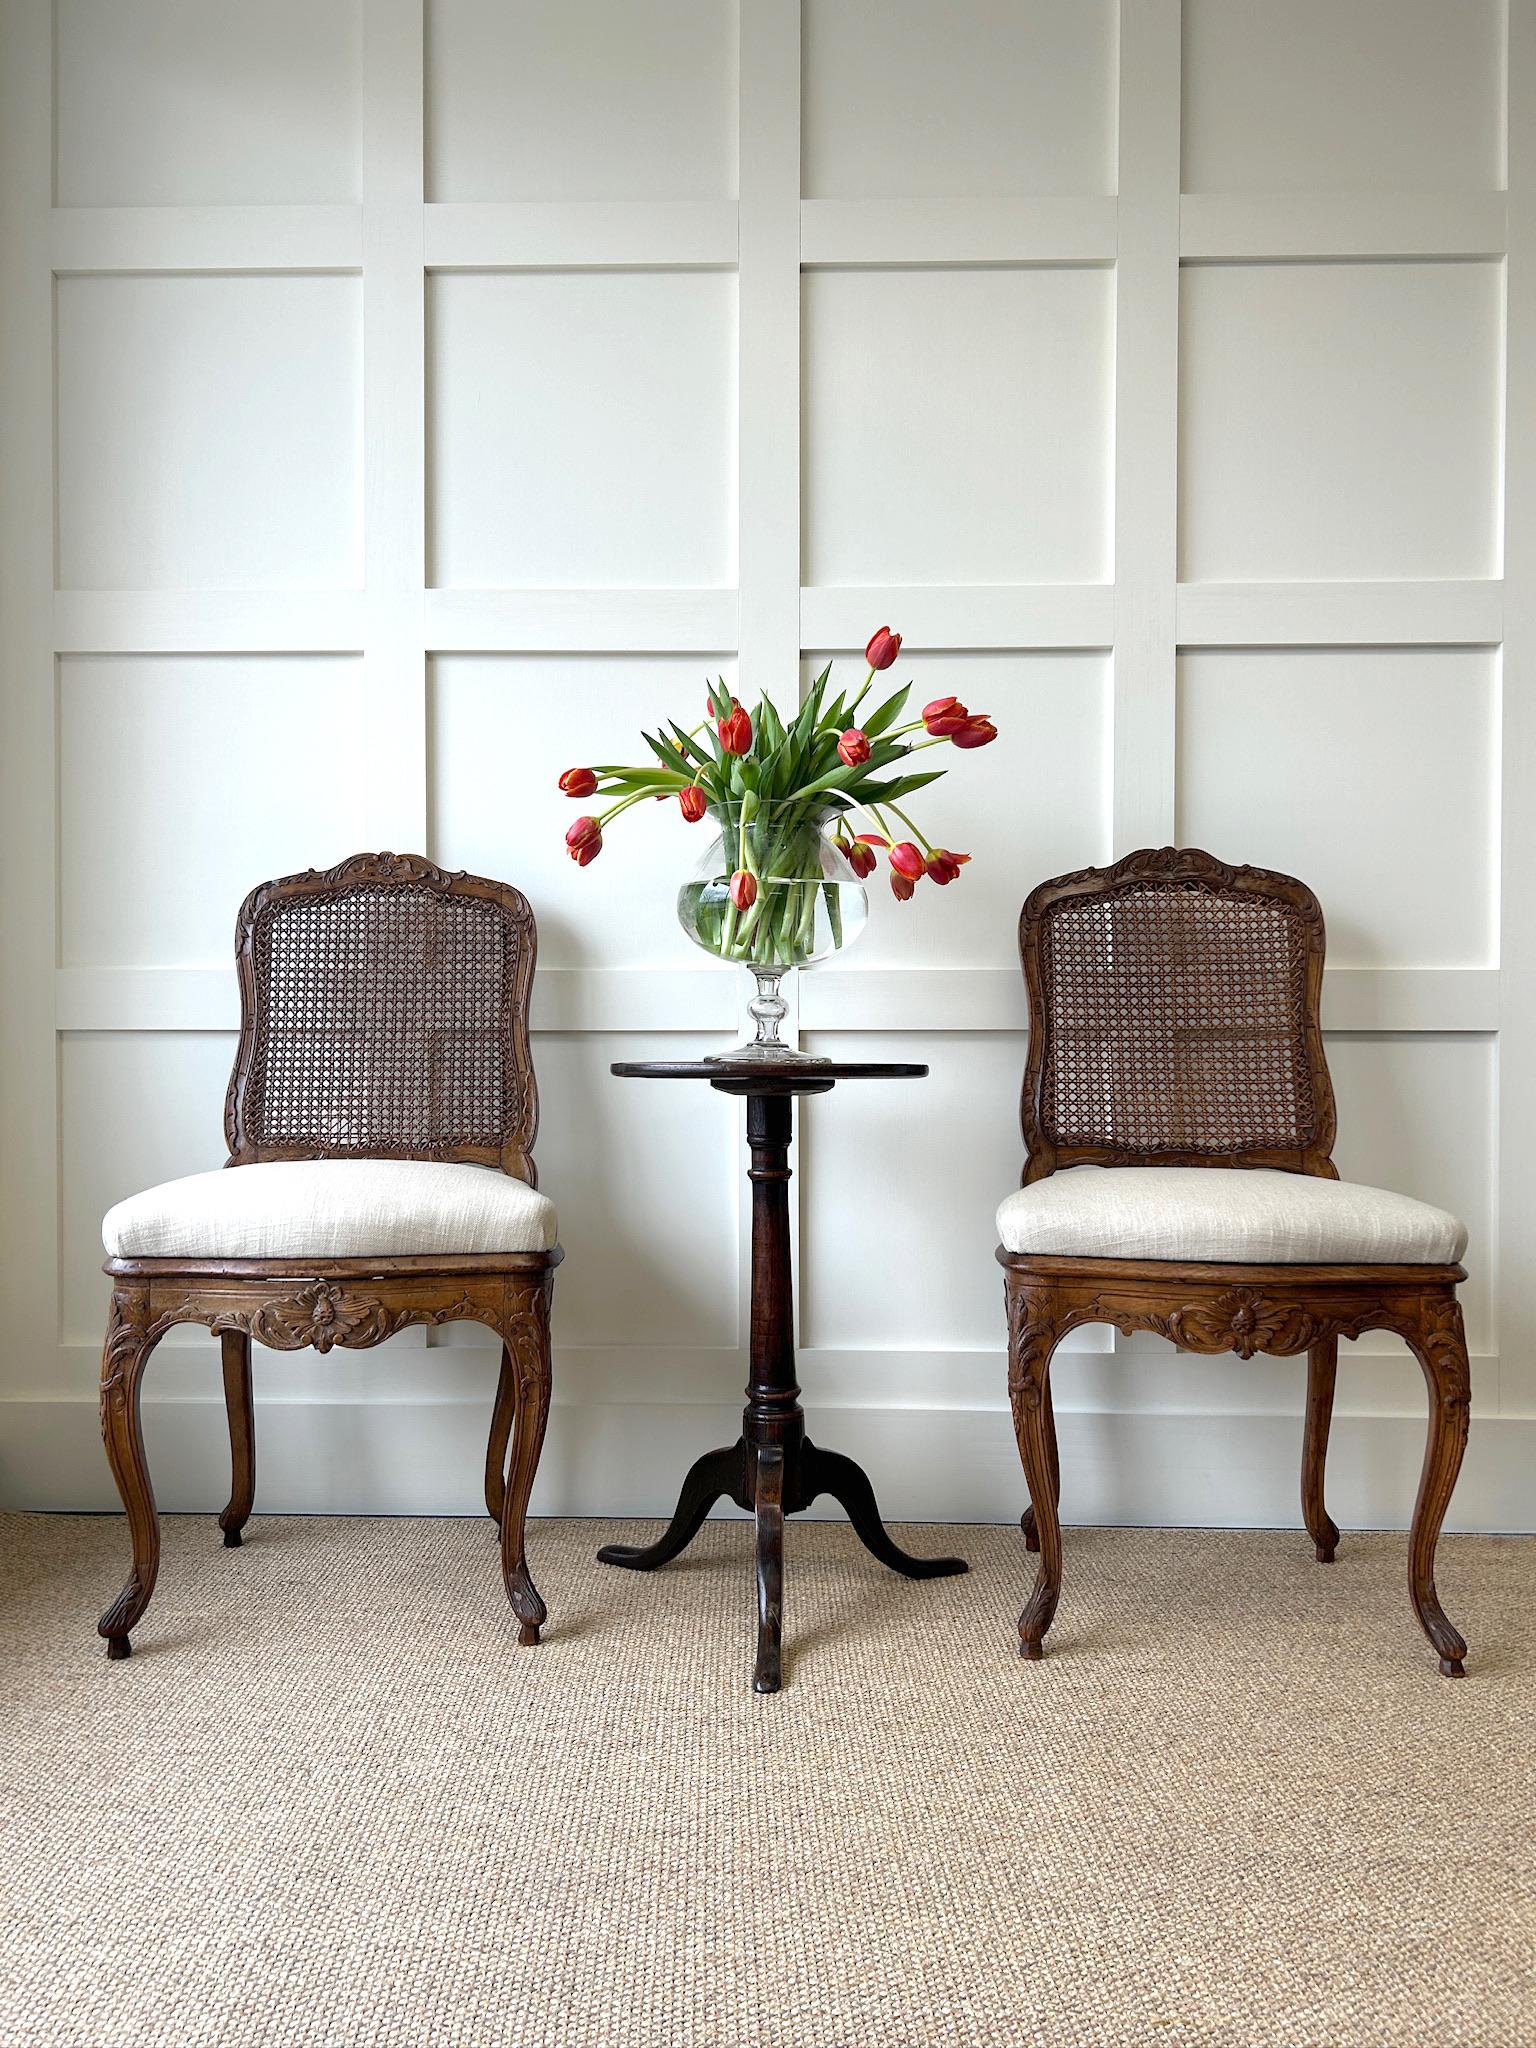 A truly delightful and charming pair of early 19th century French salon chairs. With original caned back splats.  Newly upholstered in fresh Kravet 100% linen. The silhouettes are stunning! Lovely carving, look at the beautiful sunburst pattern on